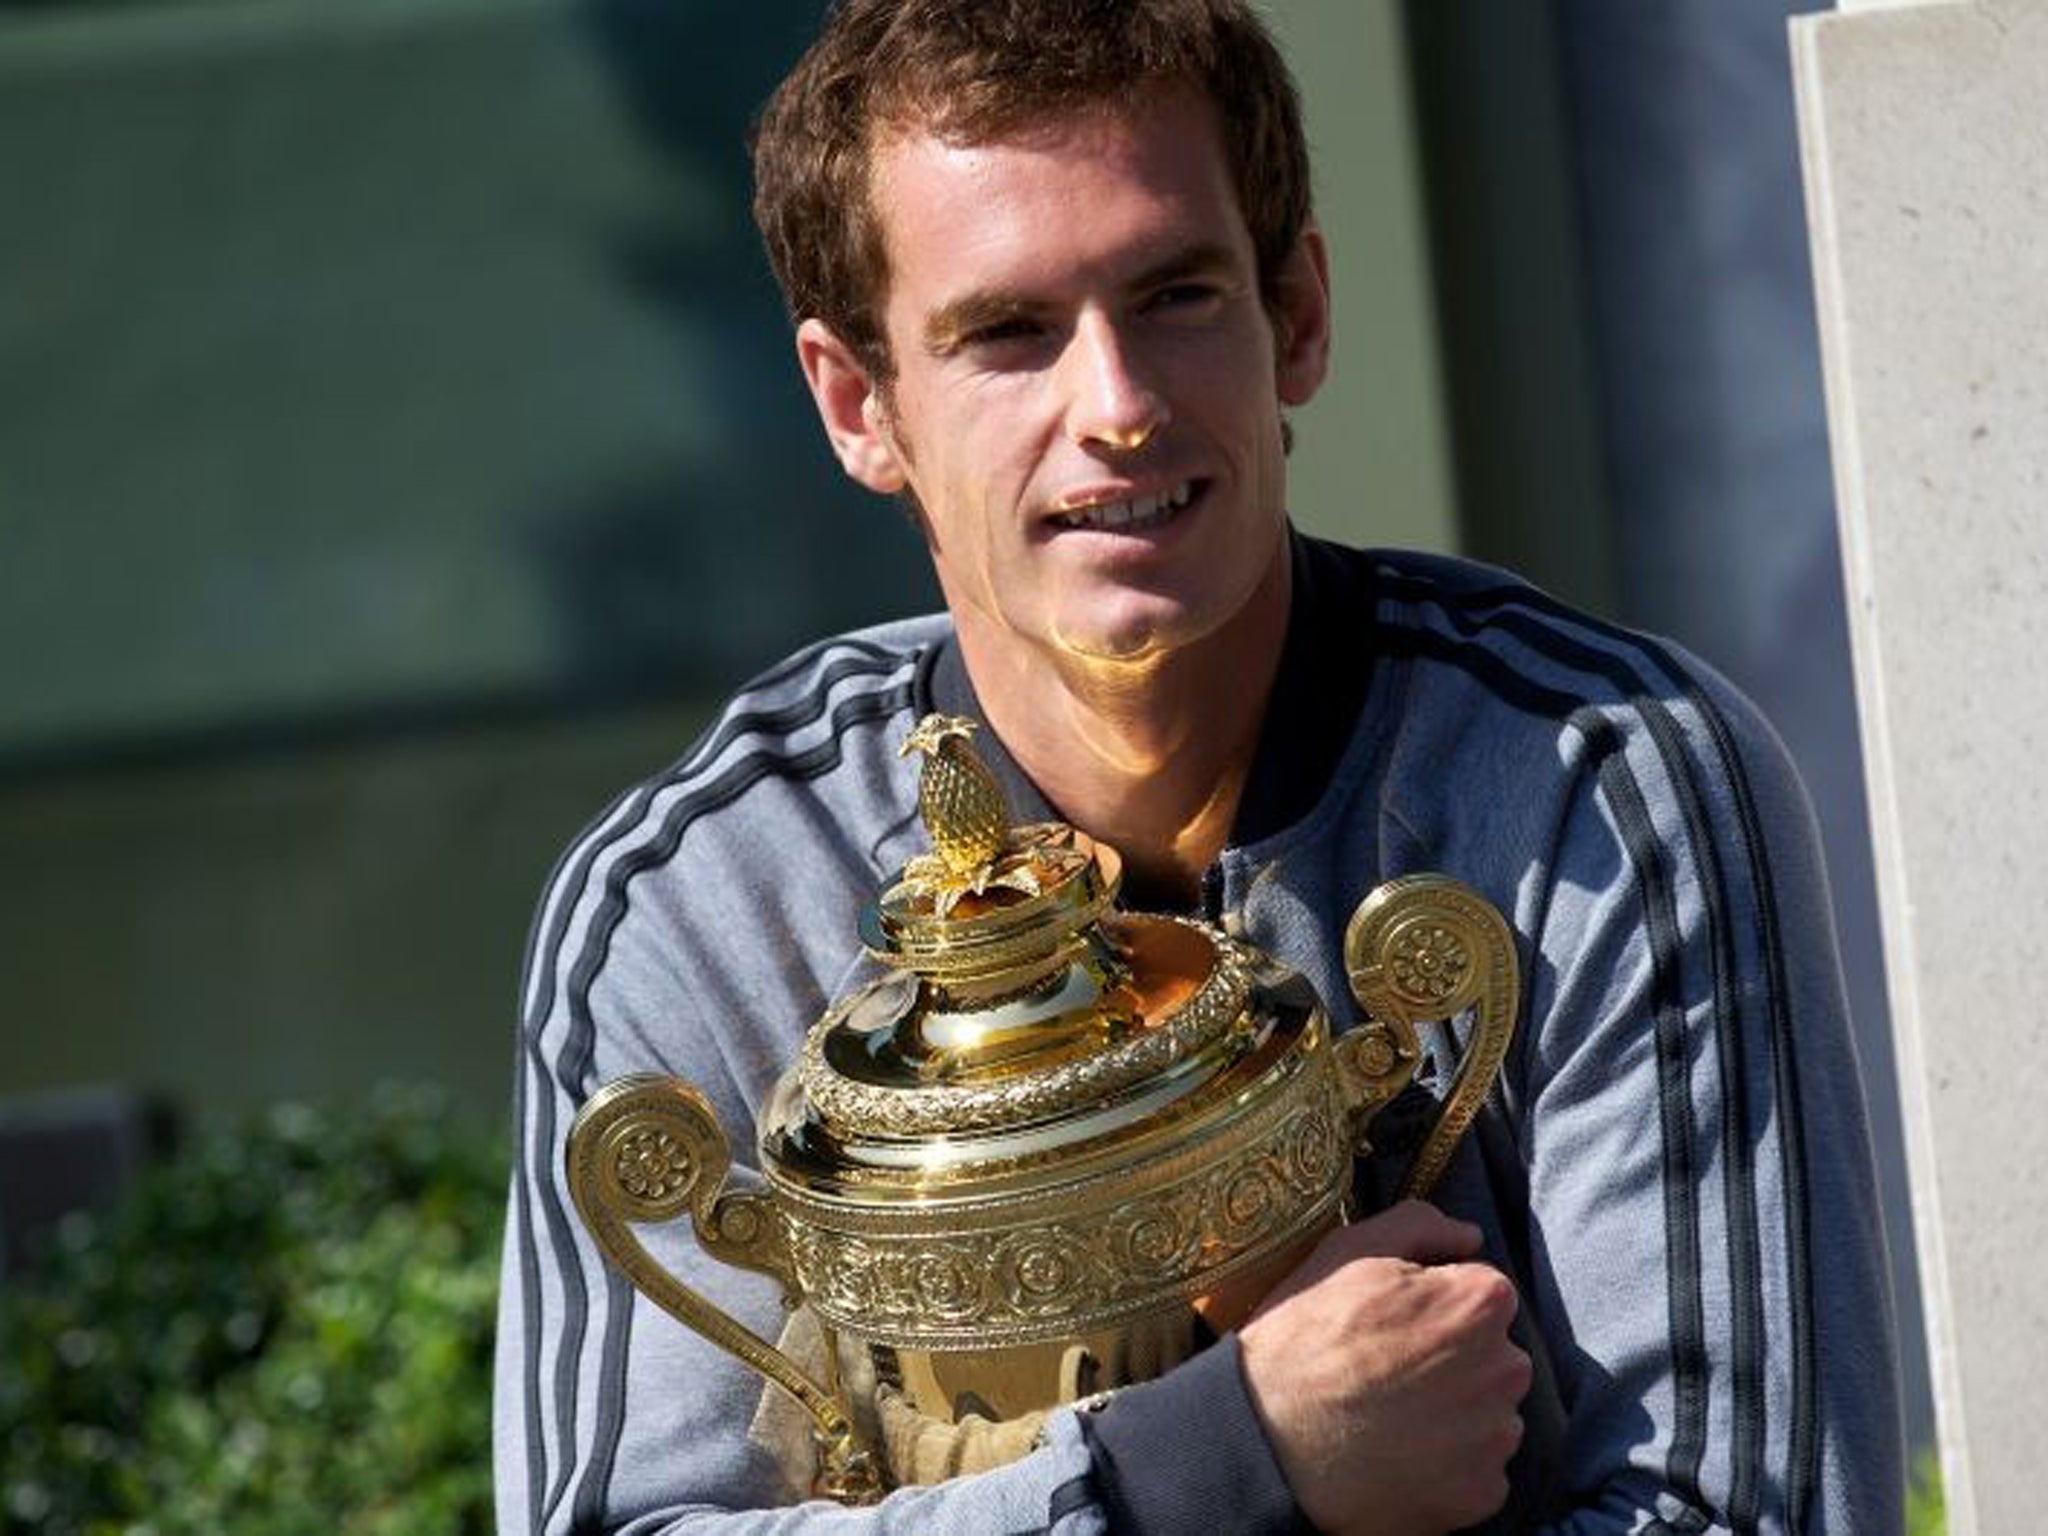 Andy Murray poses with the 2013 Wimbledon trophy at the All England Club in Wimbledon, a day after he won the men's singles final match against Novak Djokovic. Murray said he is determined to push on from his stunning Wimbledon win and add further Grand S